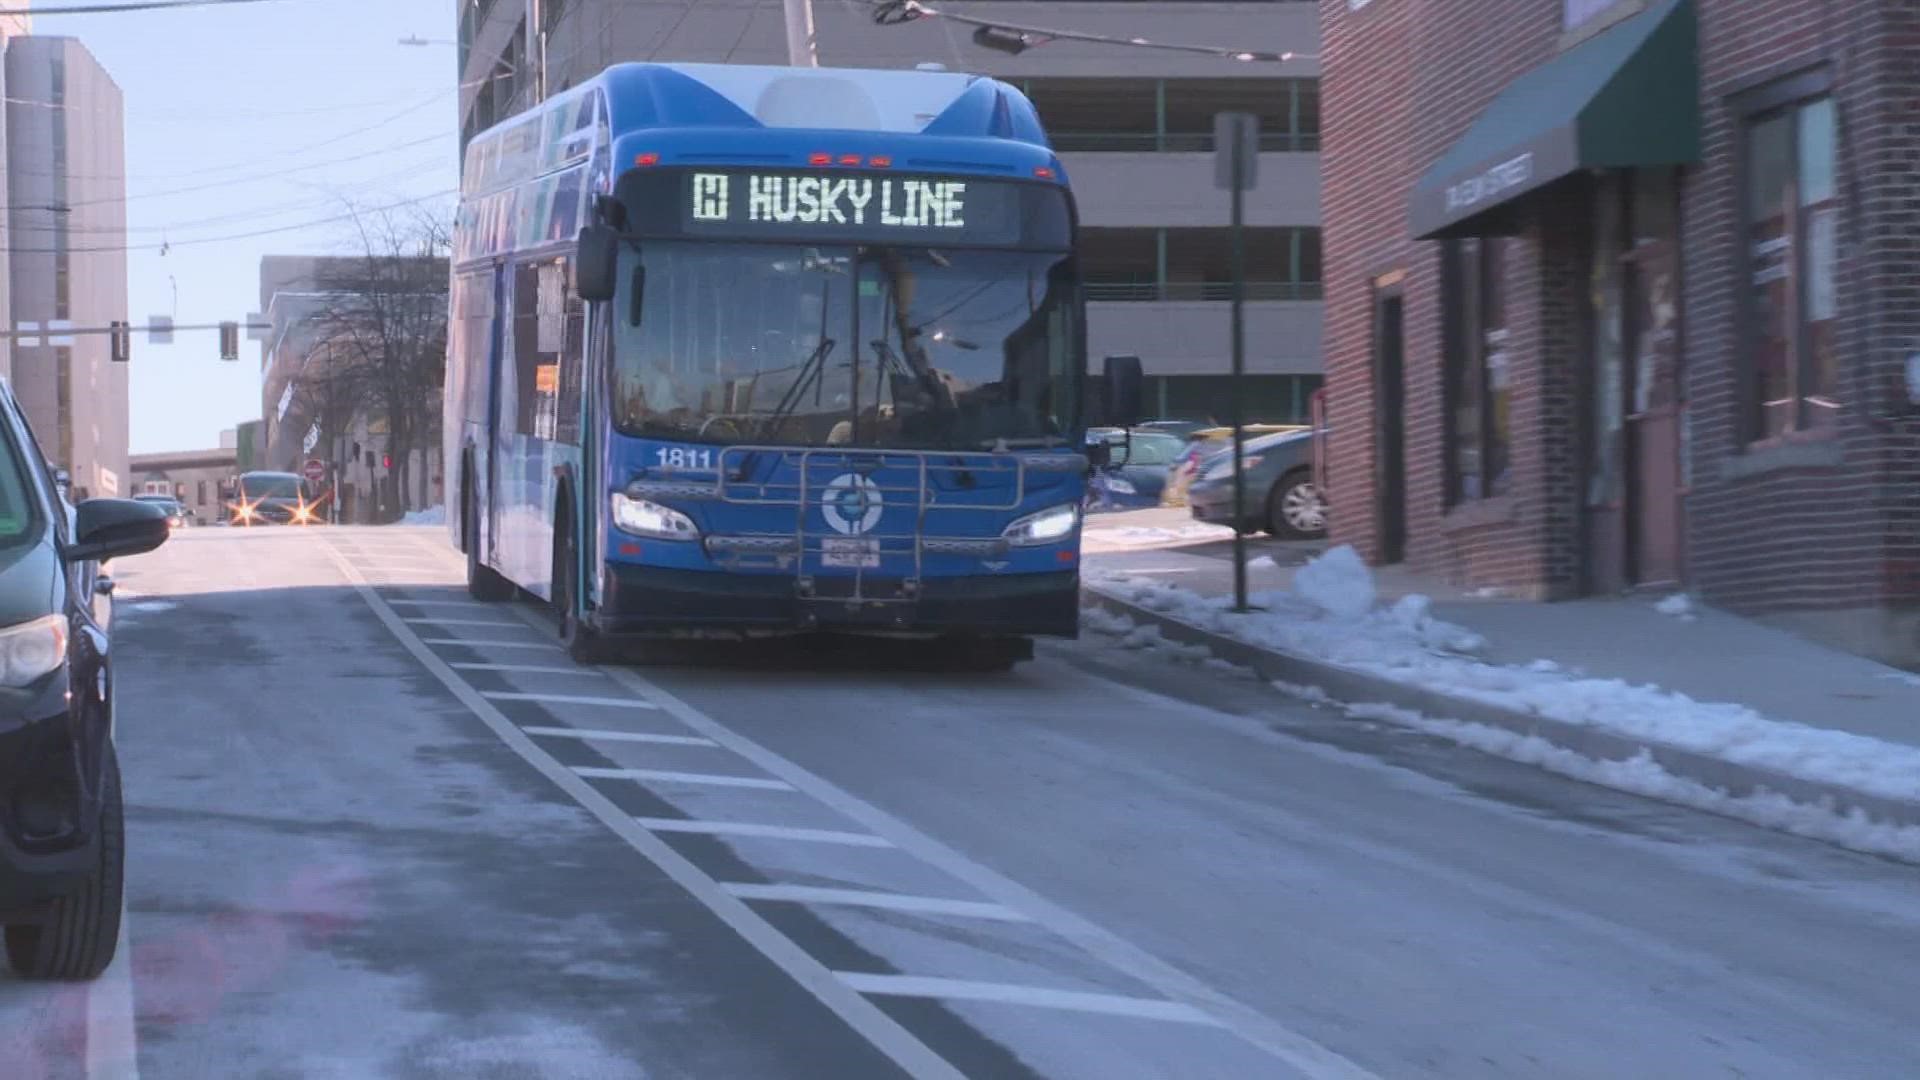 Maine transit agencies reached an agreement to invest $8 million in federal funds to improve their transportation network and increase ridership.